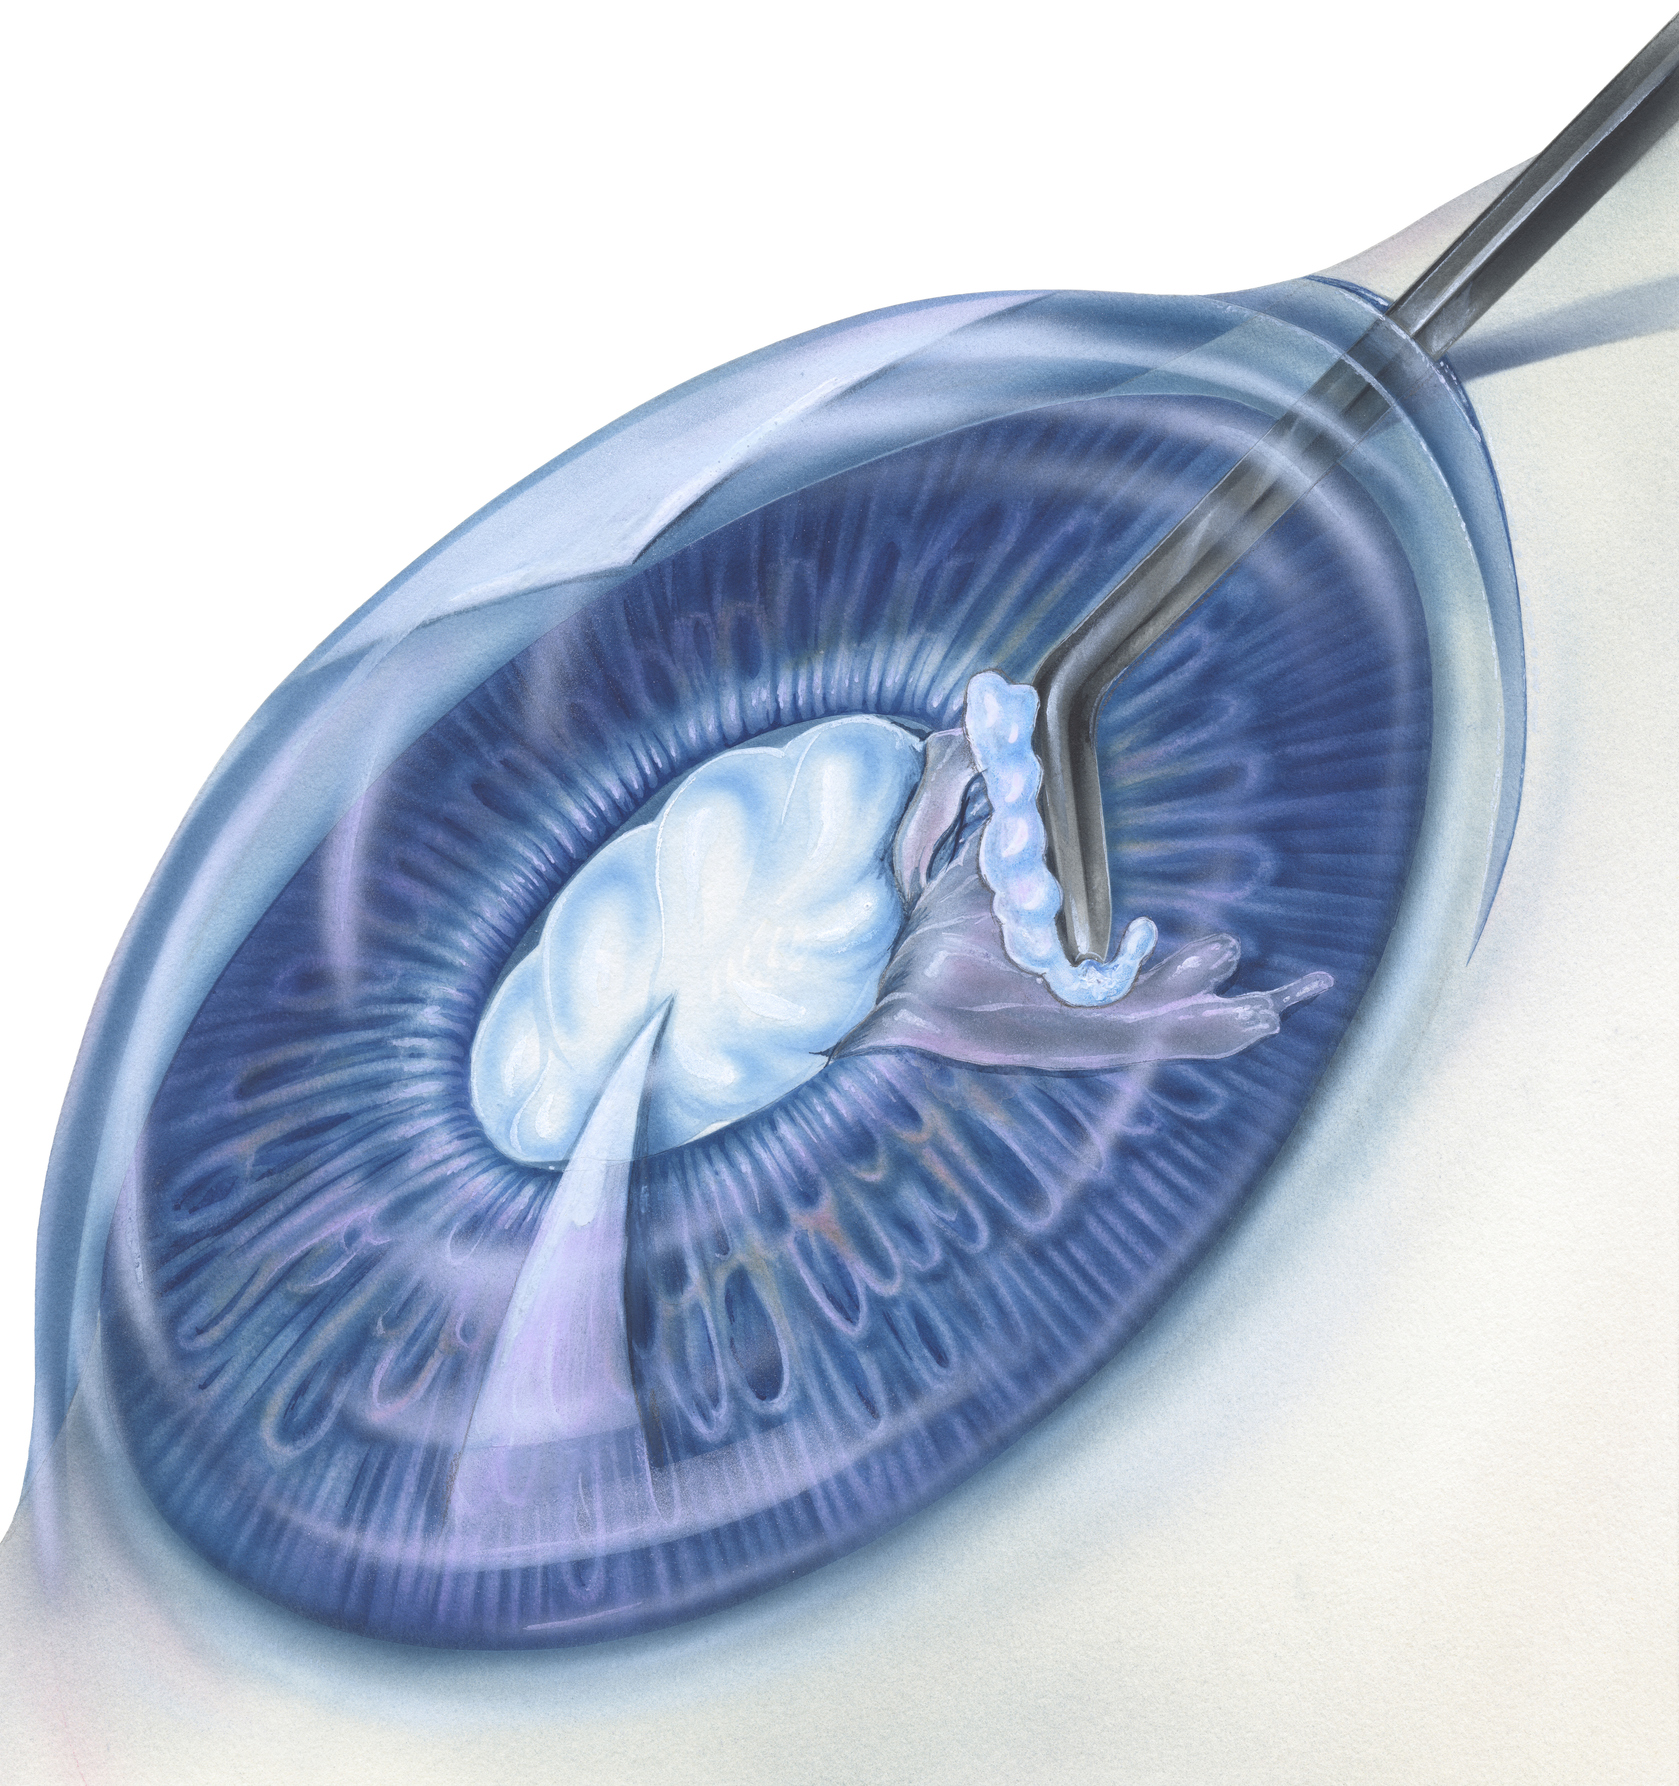 Surgical Approaches to Pterygium Removal